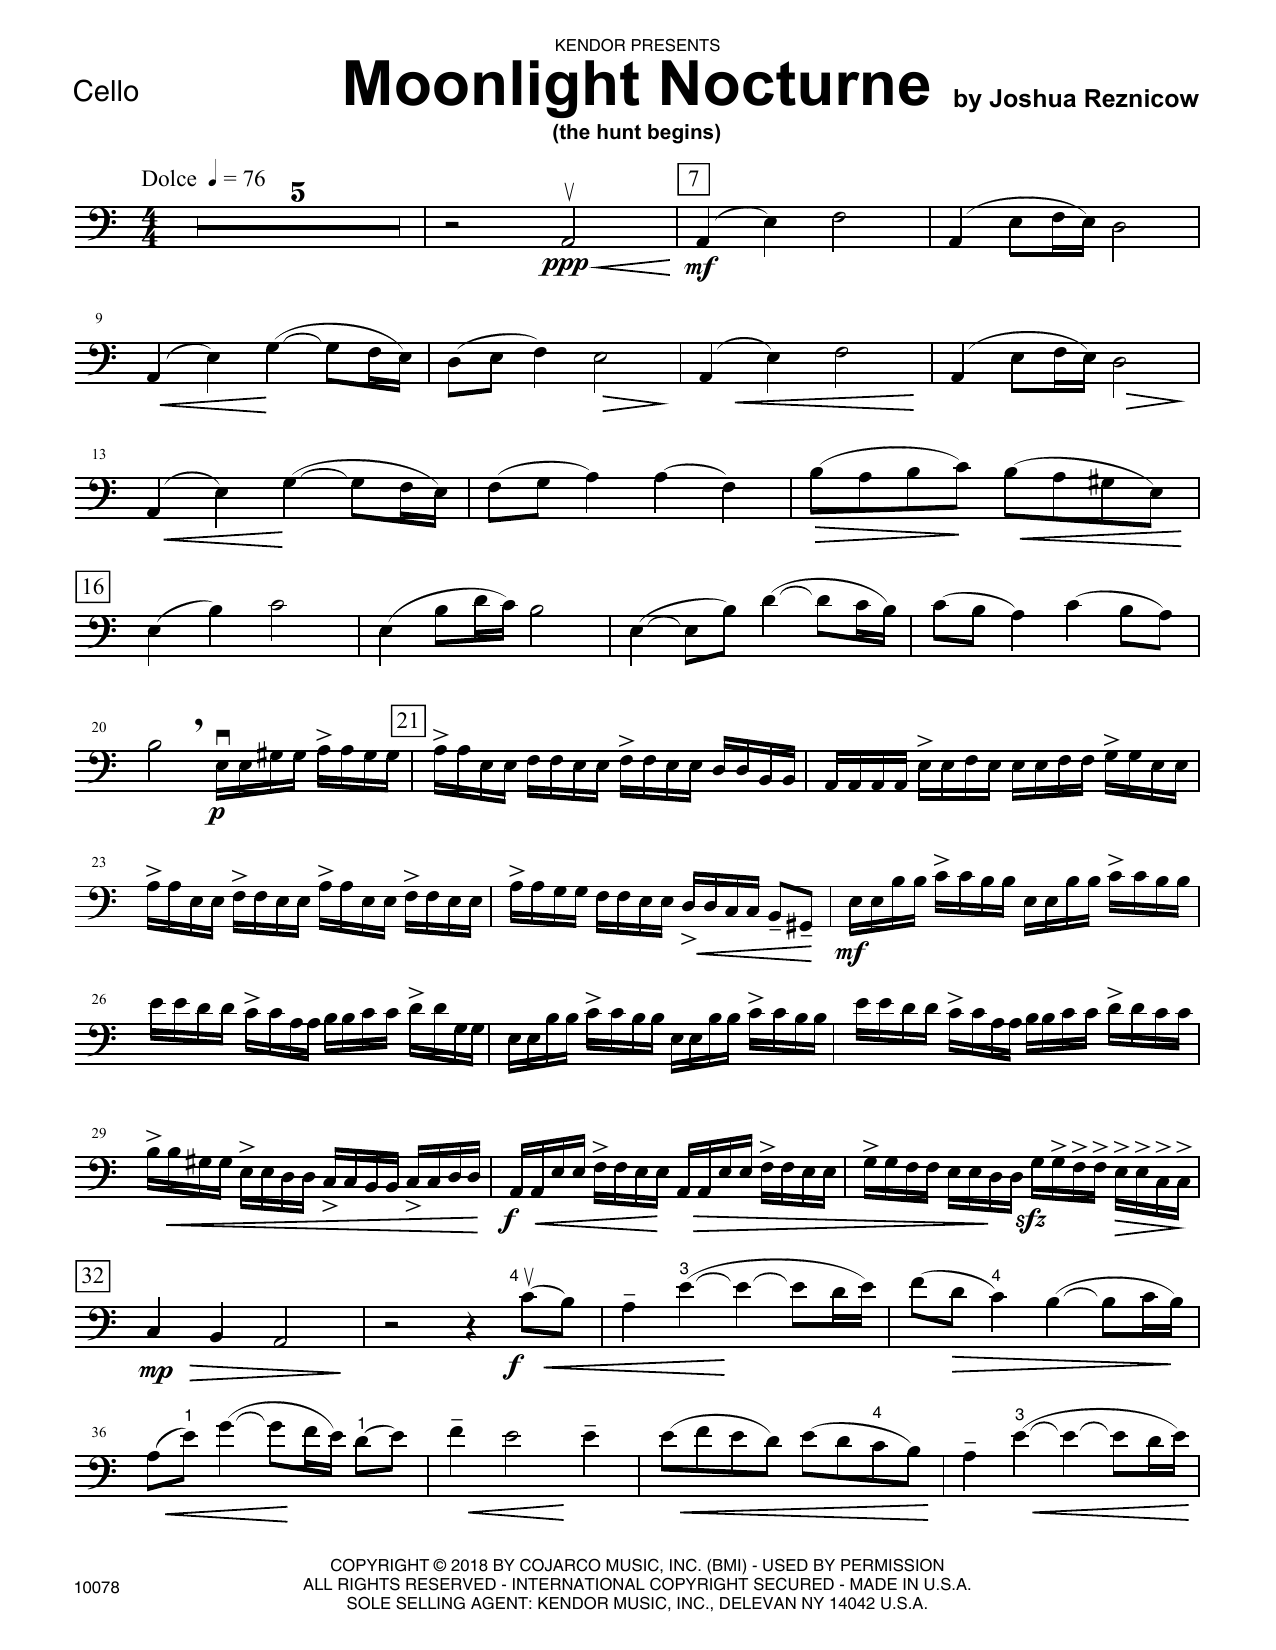 Joshua Reznicow Moonlight Nocturne (The Hunt Begins) - Cello sheet music preview music notes and score for Orchestra including 2 page(s)